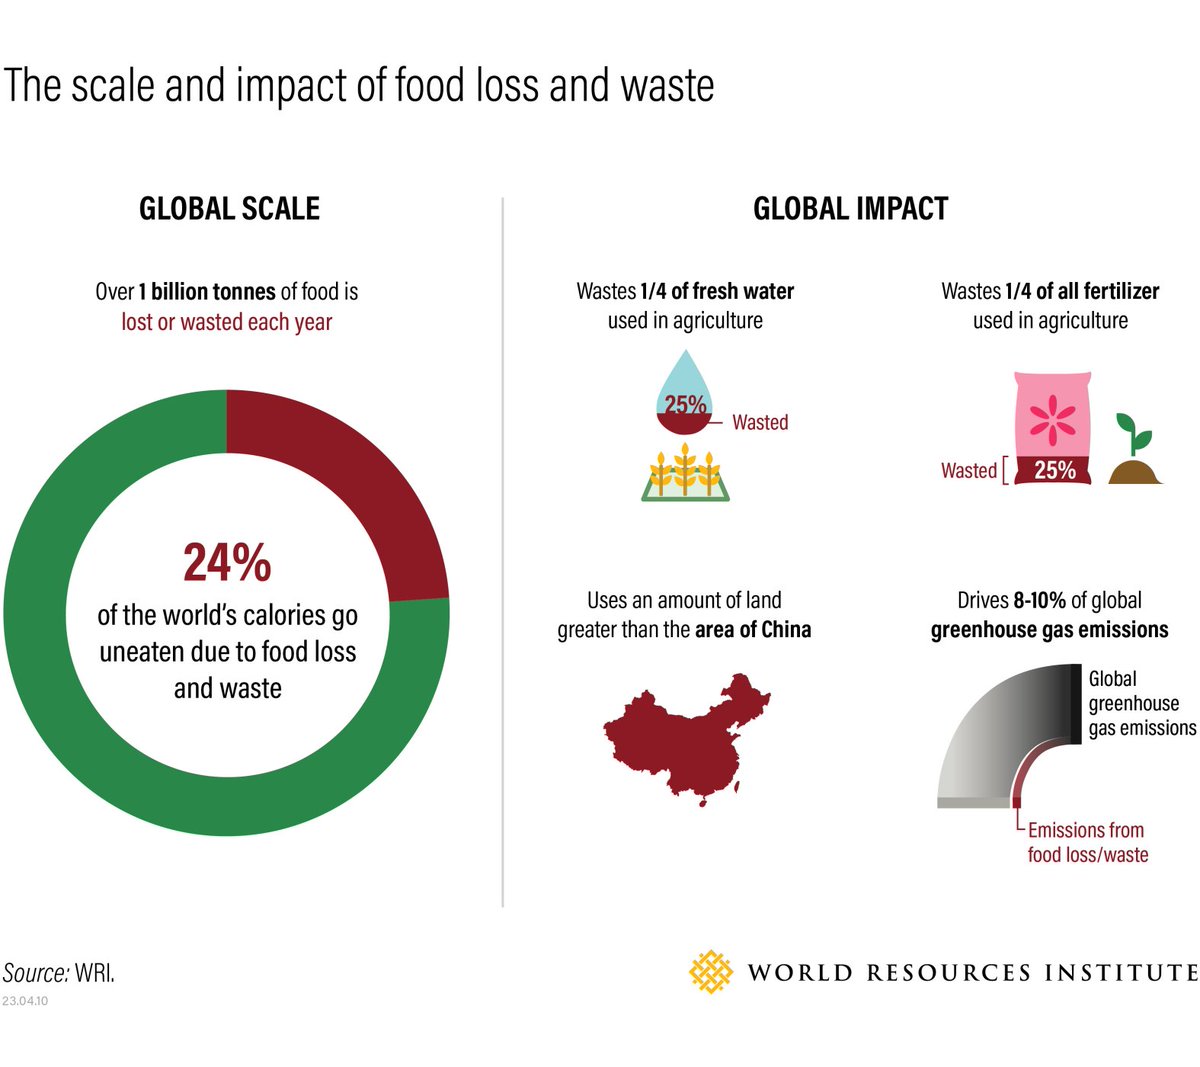 Reducing #FoodLossAndWaste globally has many benefits, including: - Improved global nutrition and #FoodSecurity - Reduced #GHGEmissions - Financial savings for consumers and businesses - Increased financial security for farmers Read more ⬇️ bit.ly/47kfqWb